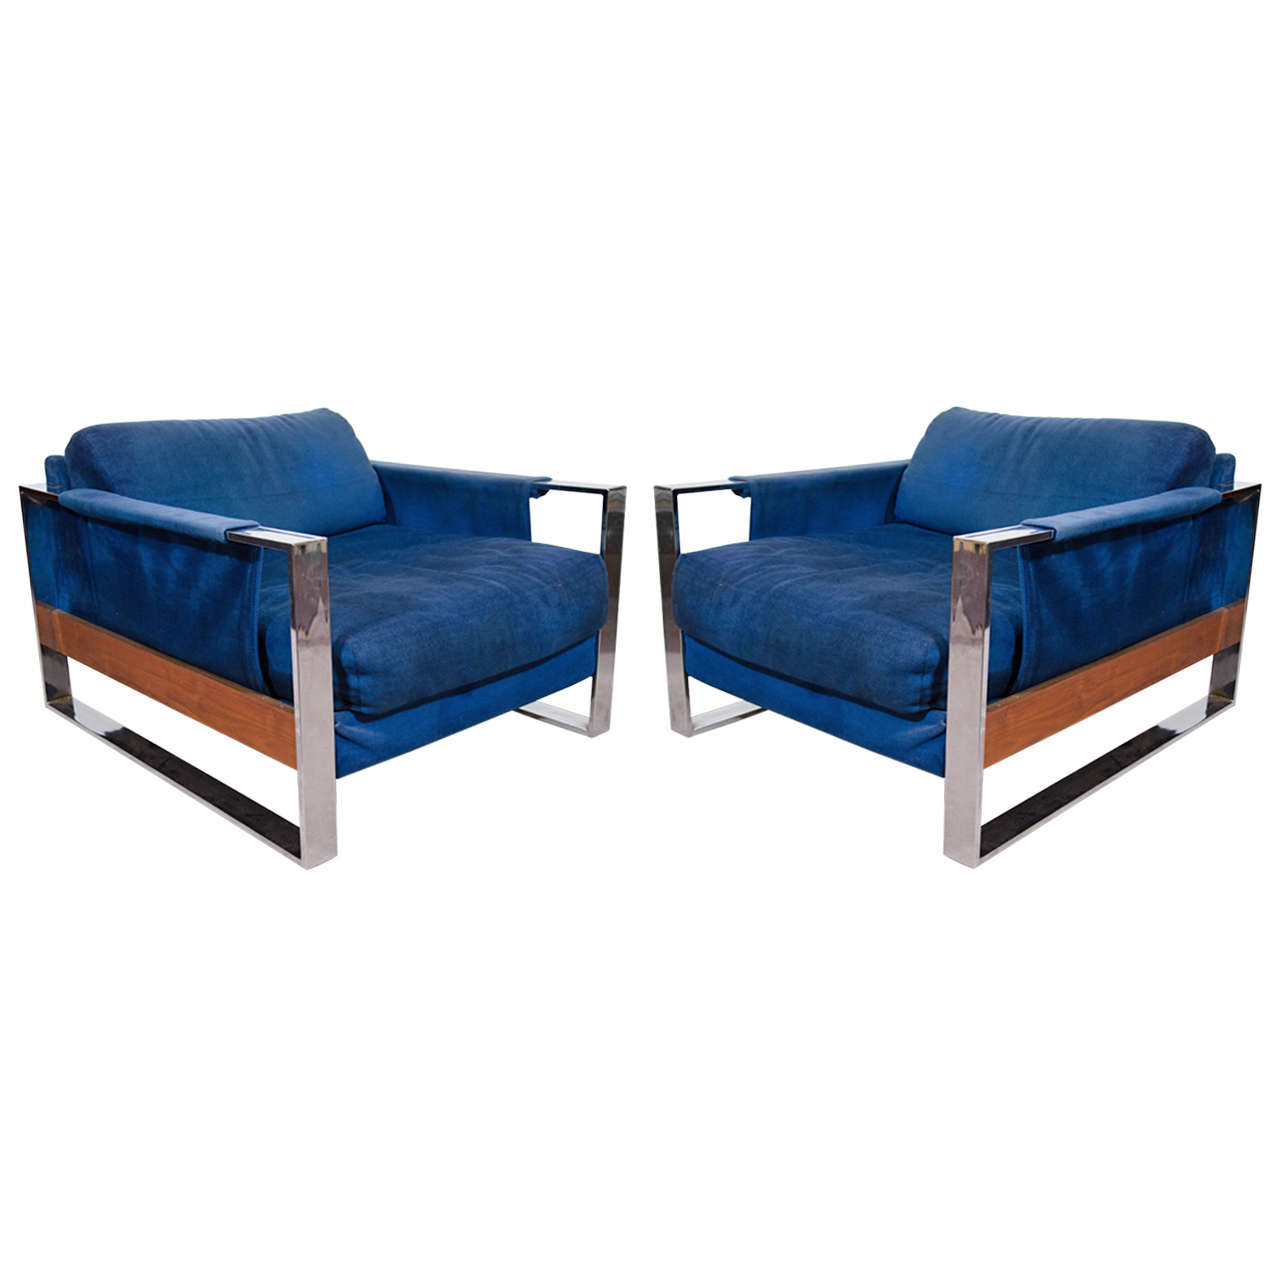 A Mid Century Pair of Craft Arm Chairs